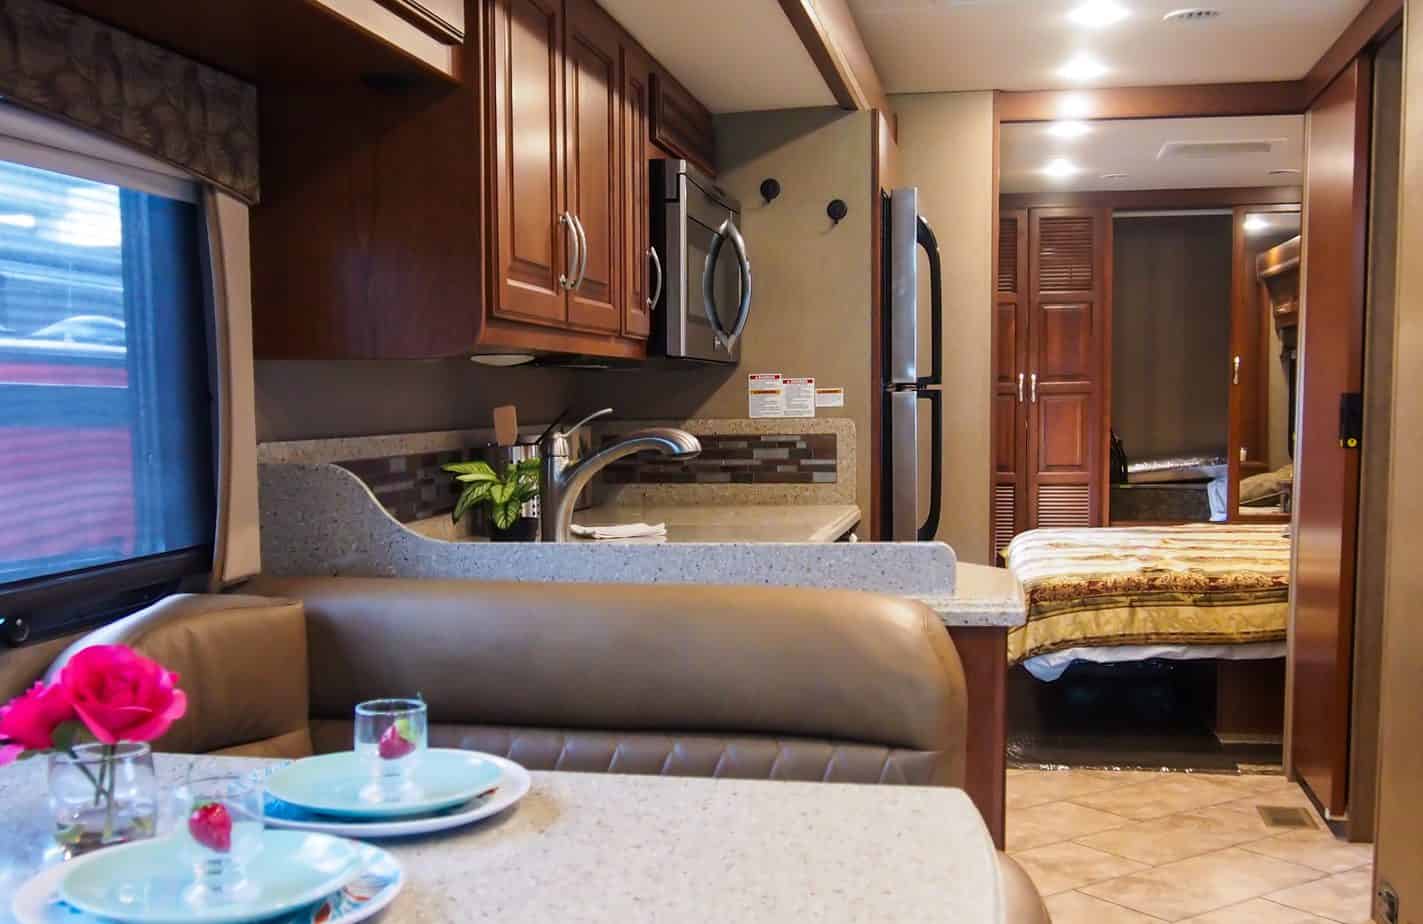 Pros and Cons of Living Full-Time in an RV